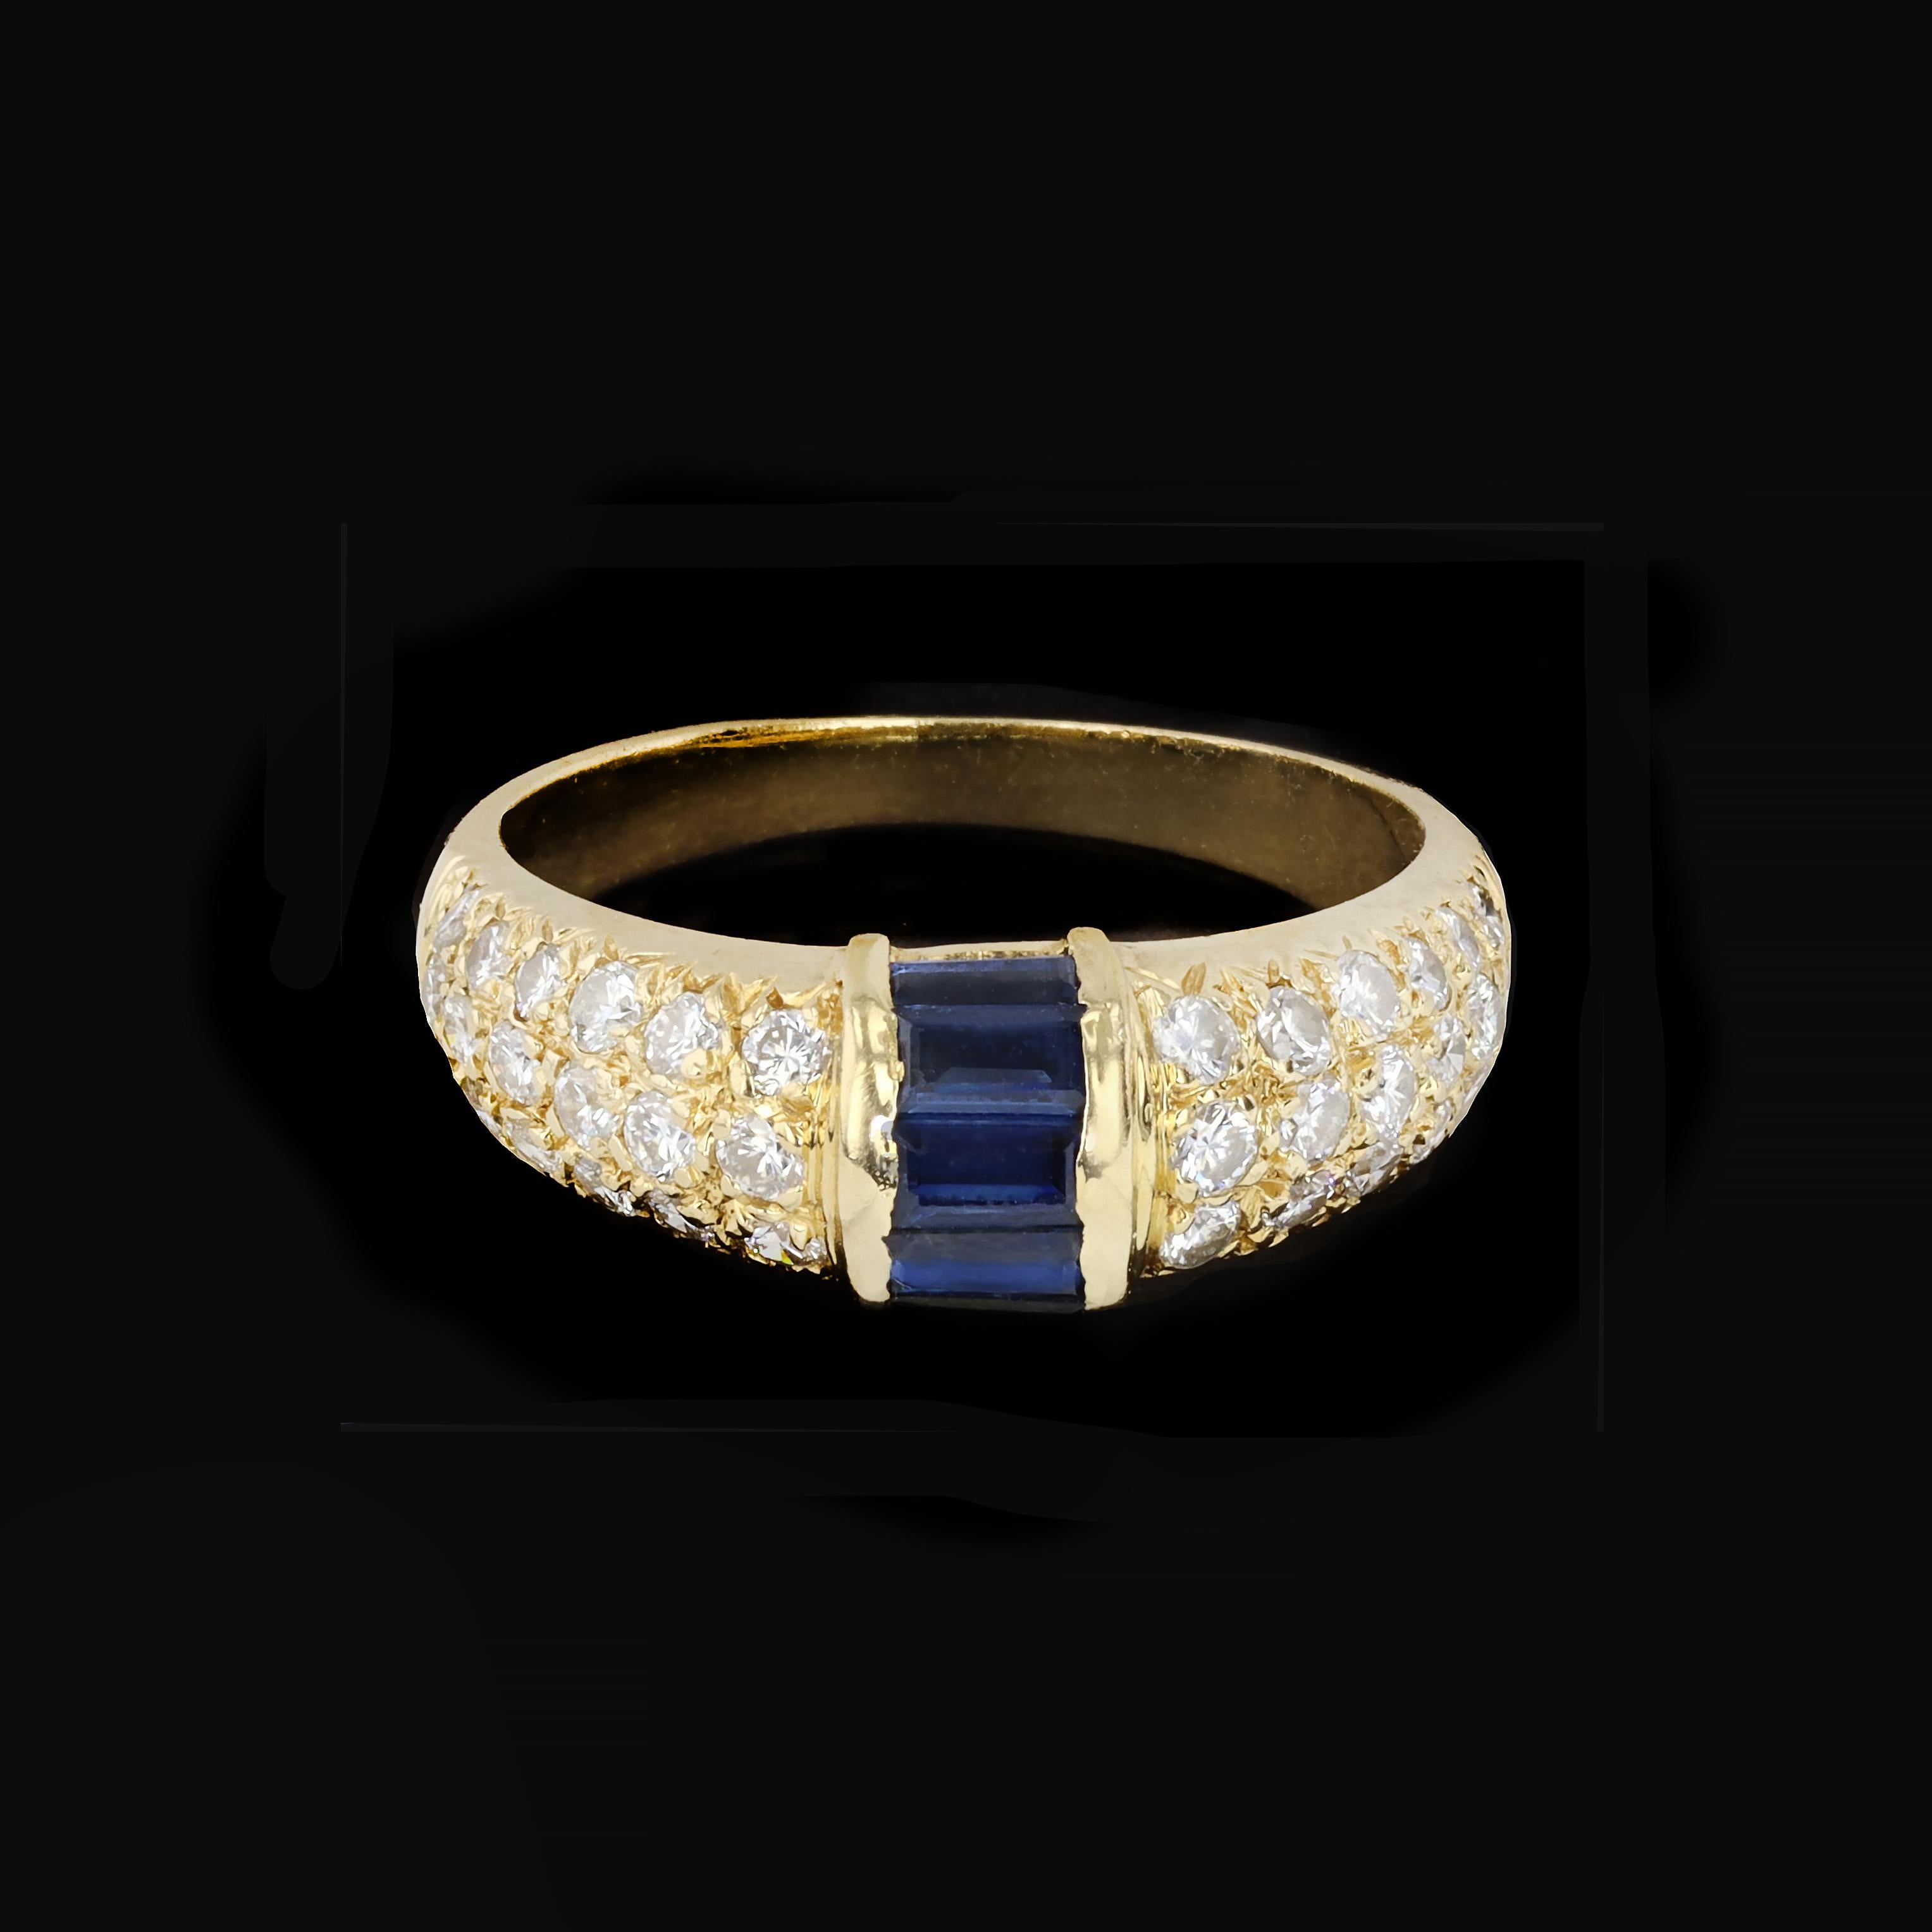 Sophisticated with standout style, this can be your go-to ring that will coordinate with everything. Three shimmering rows of round cut diamonds, weighing approximately 0.80ct,. are accented by a band of five baguette cut sapphires. Set in 14K